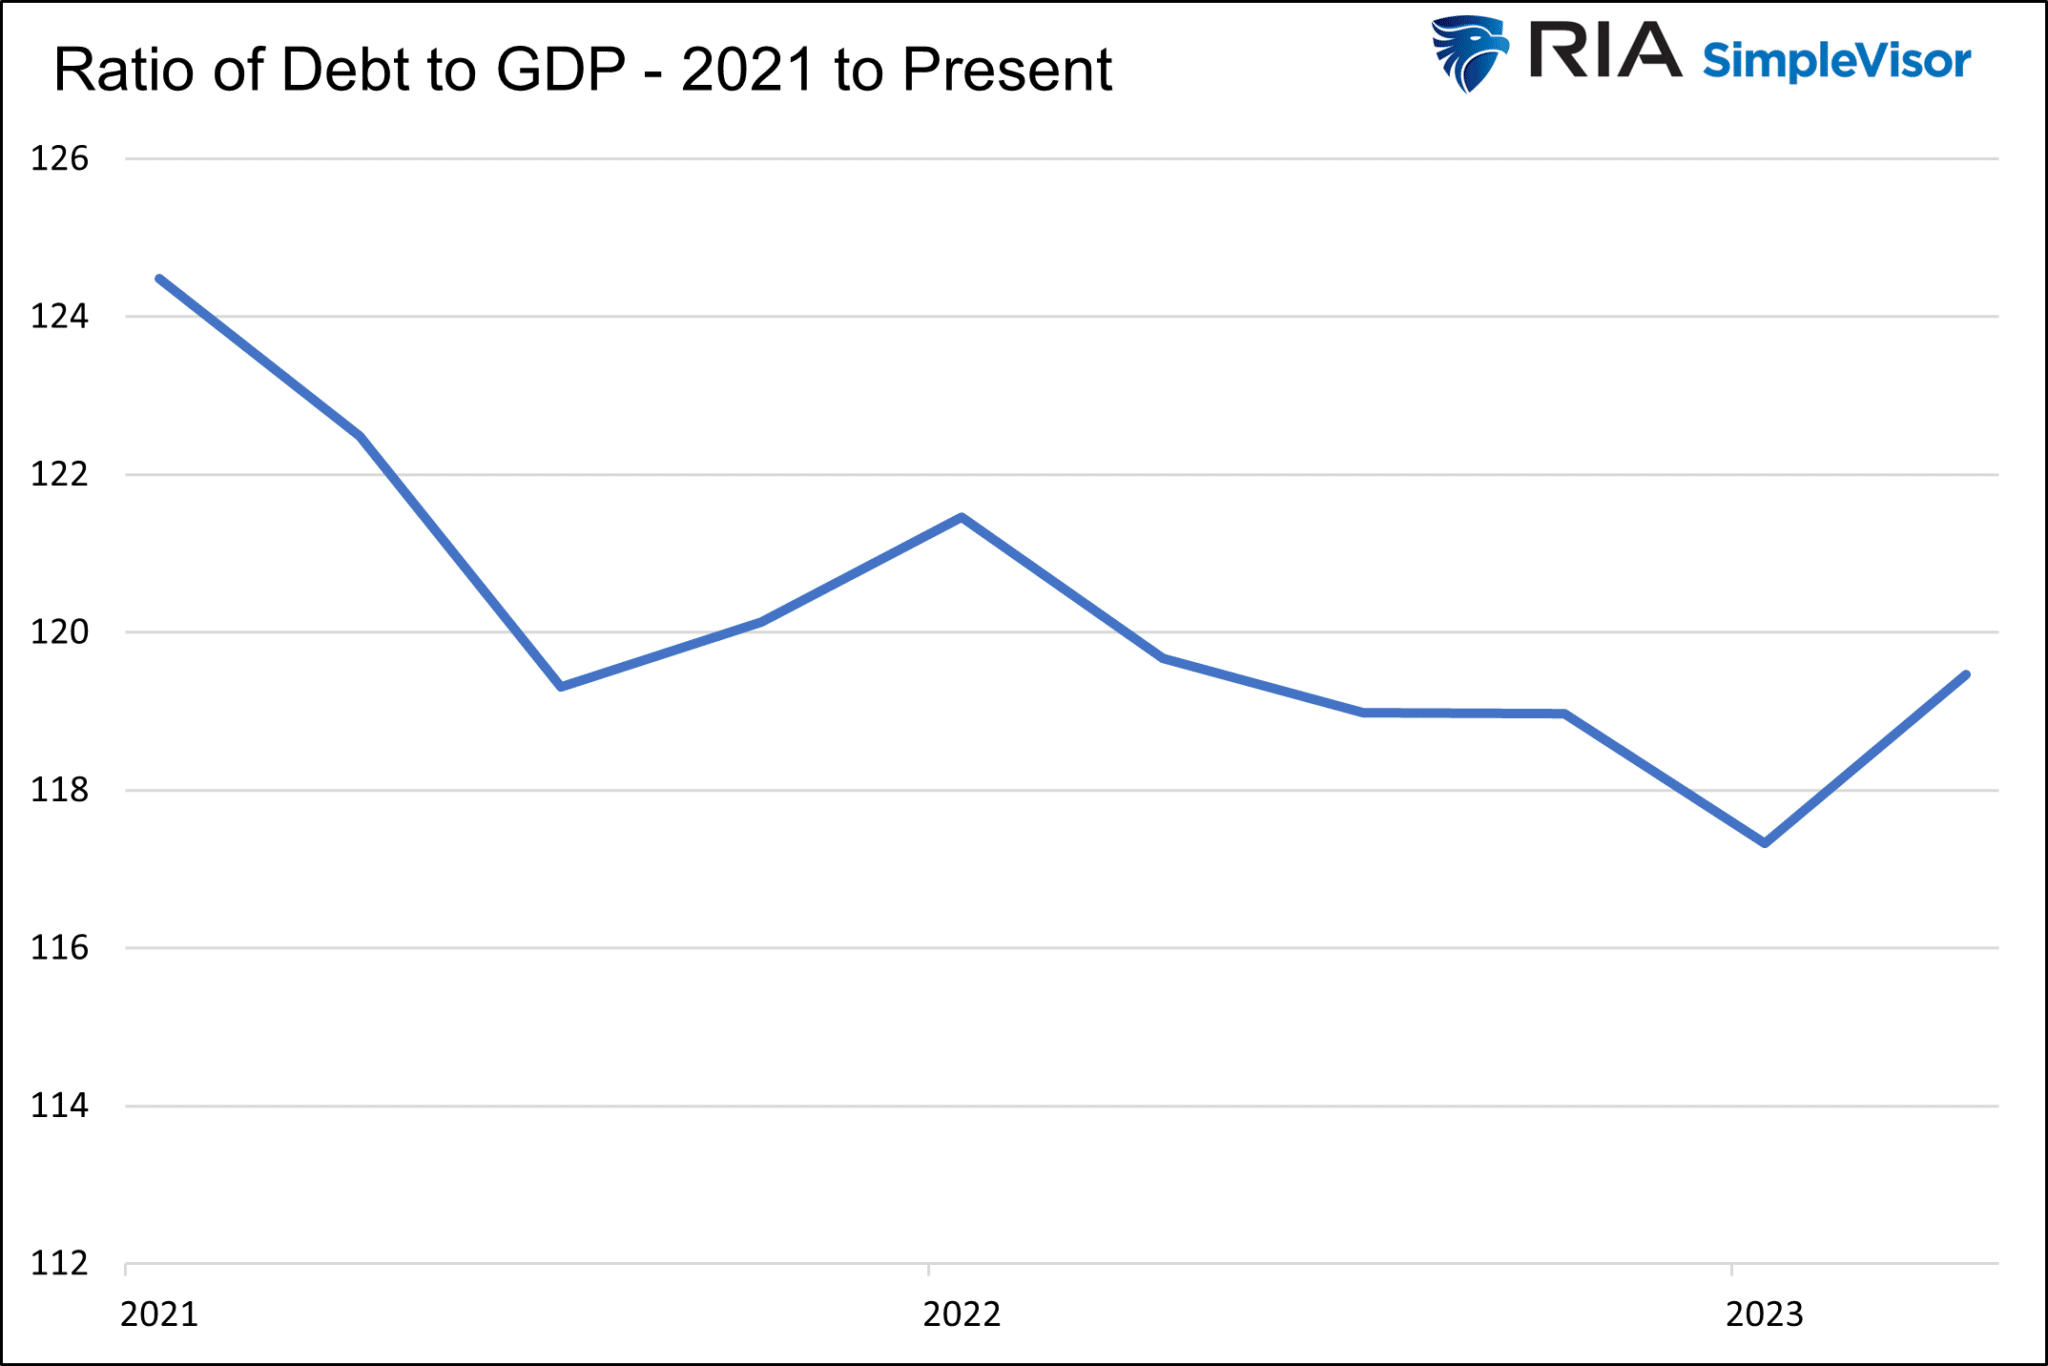 Debt to GDP Ratio-2021 to Present